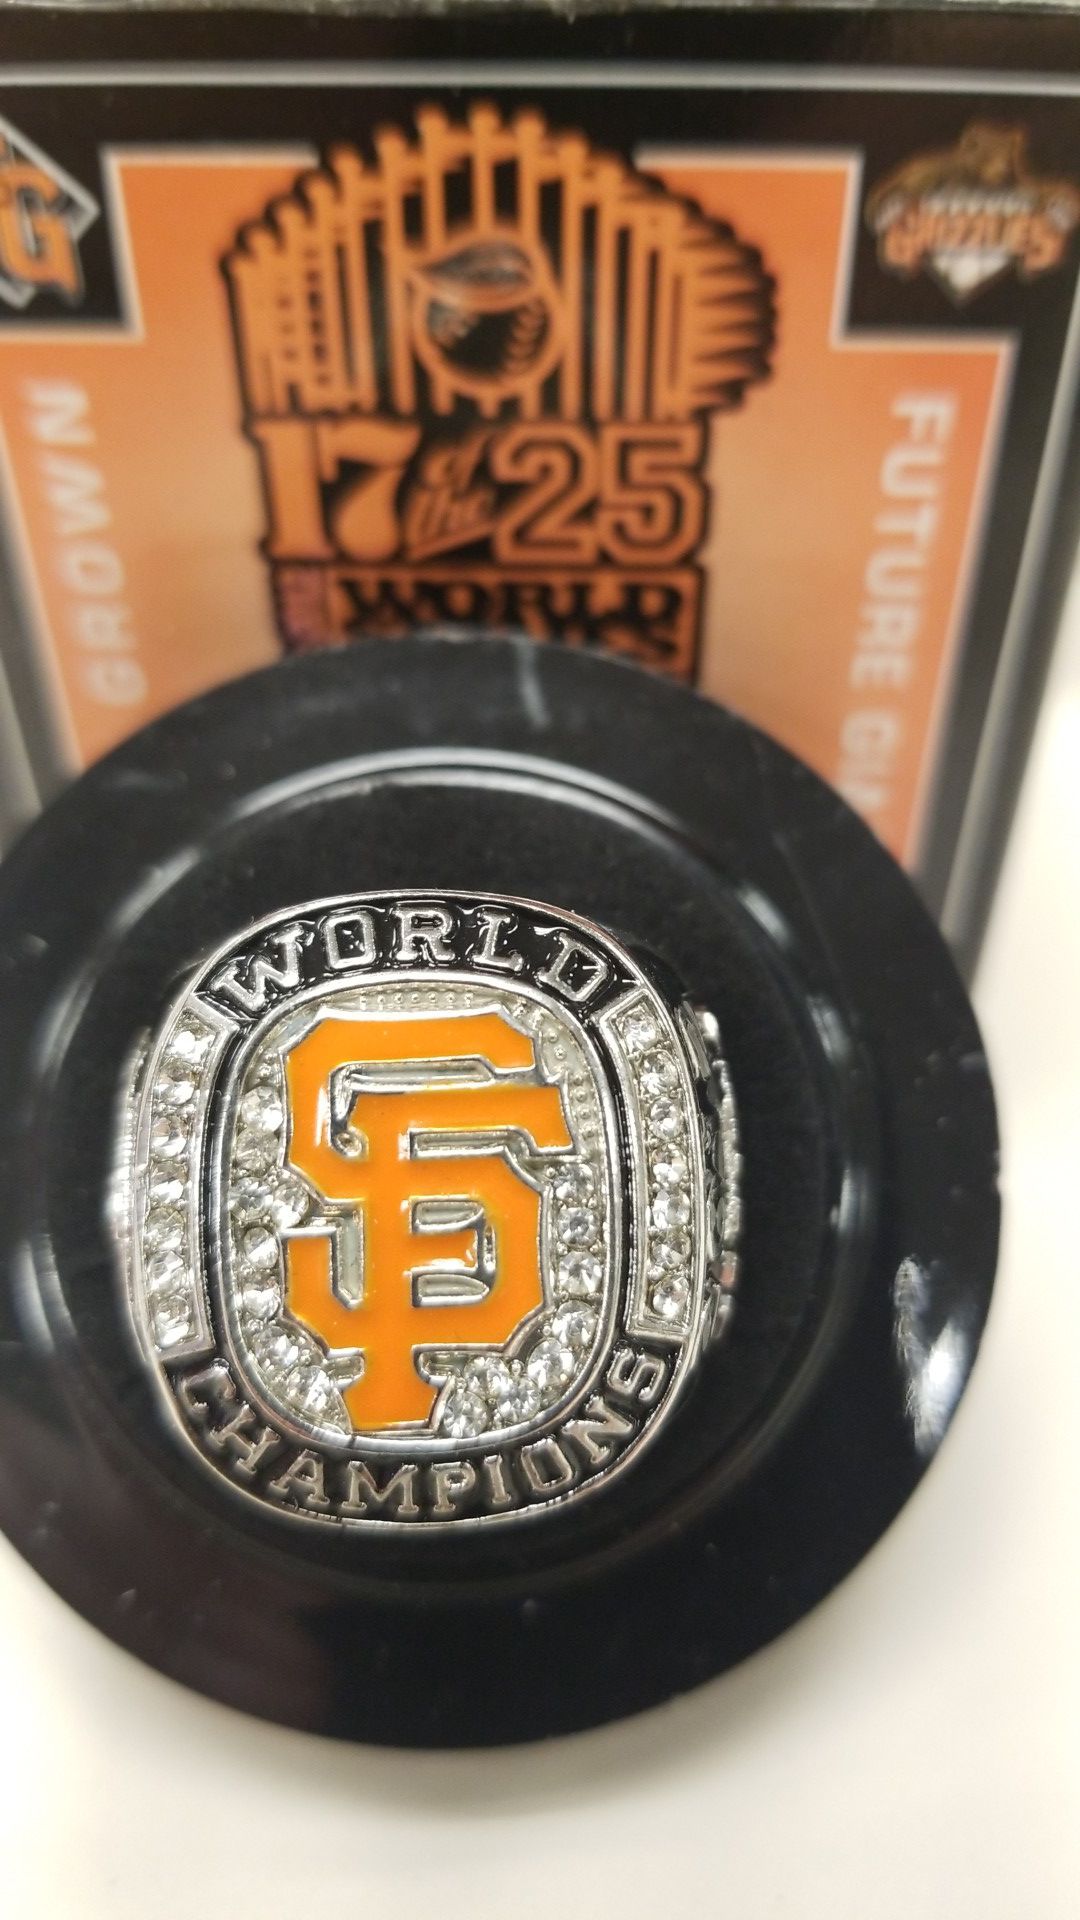 Fresno Grizzlies stadium giveaway 2012 S.F. Giants ring